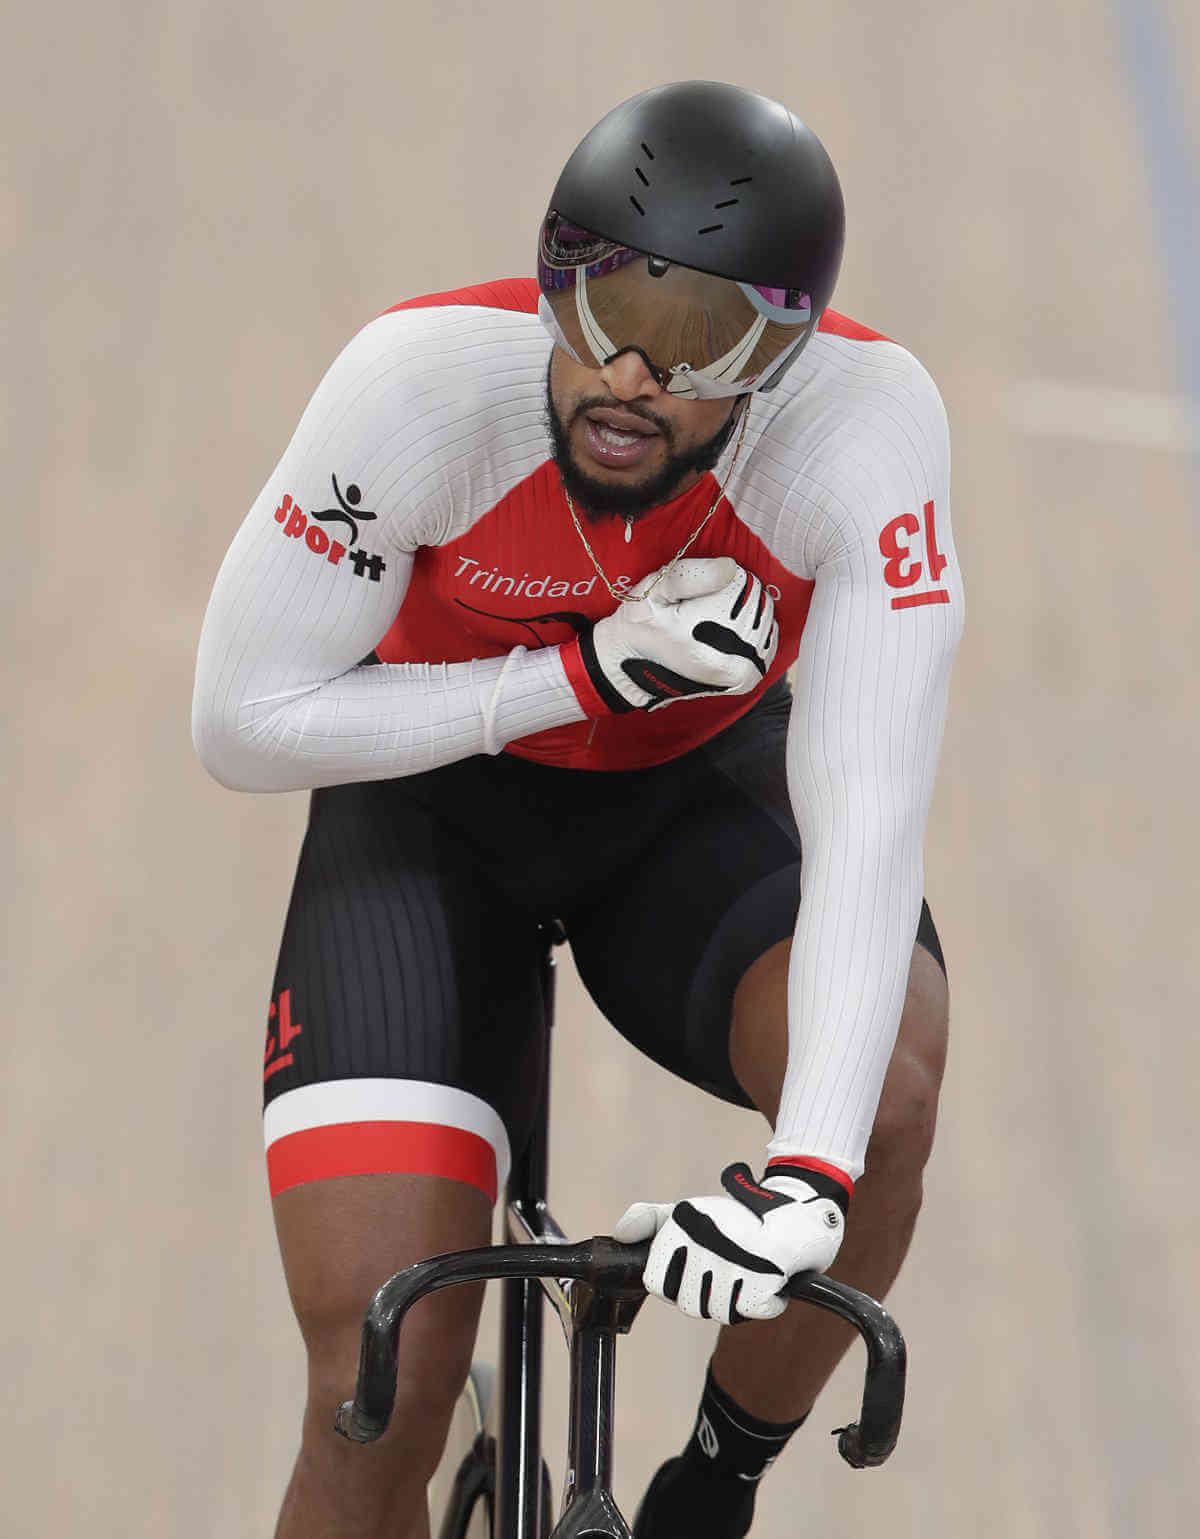 Trinidad and Tobago's Nicholas Paul celebrates after competing in the cycling track sprint men's semifinals heat 1 during the Pan American Games in Lima, Peru,Saturday, Aug. 3, 2019.